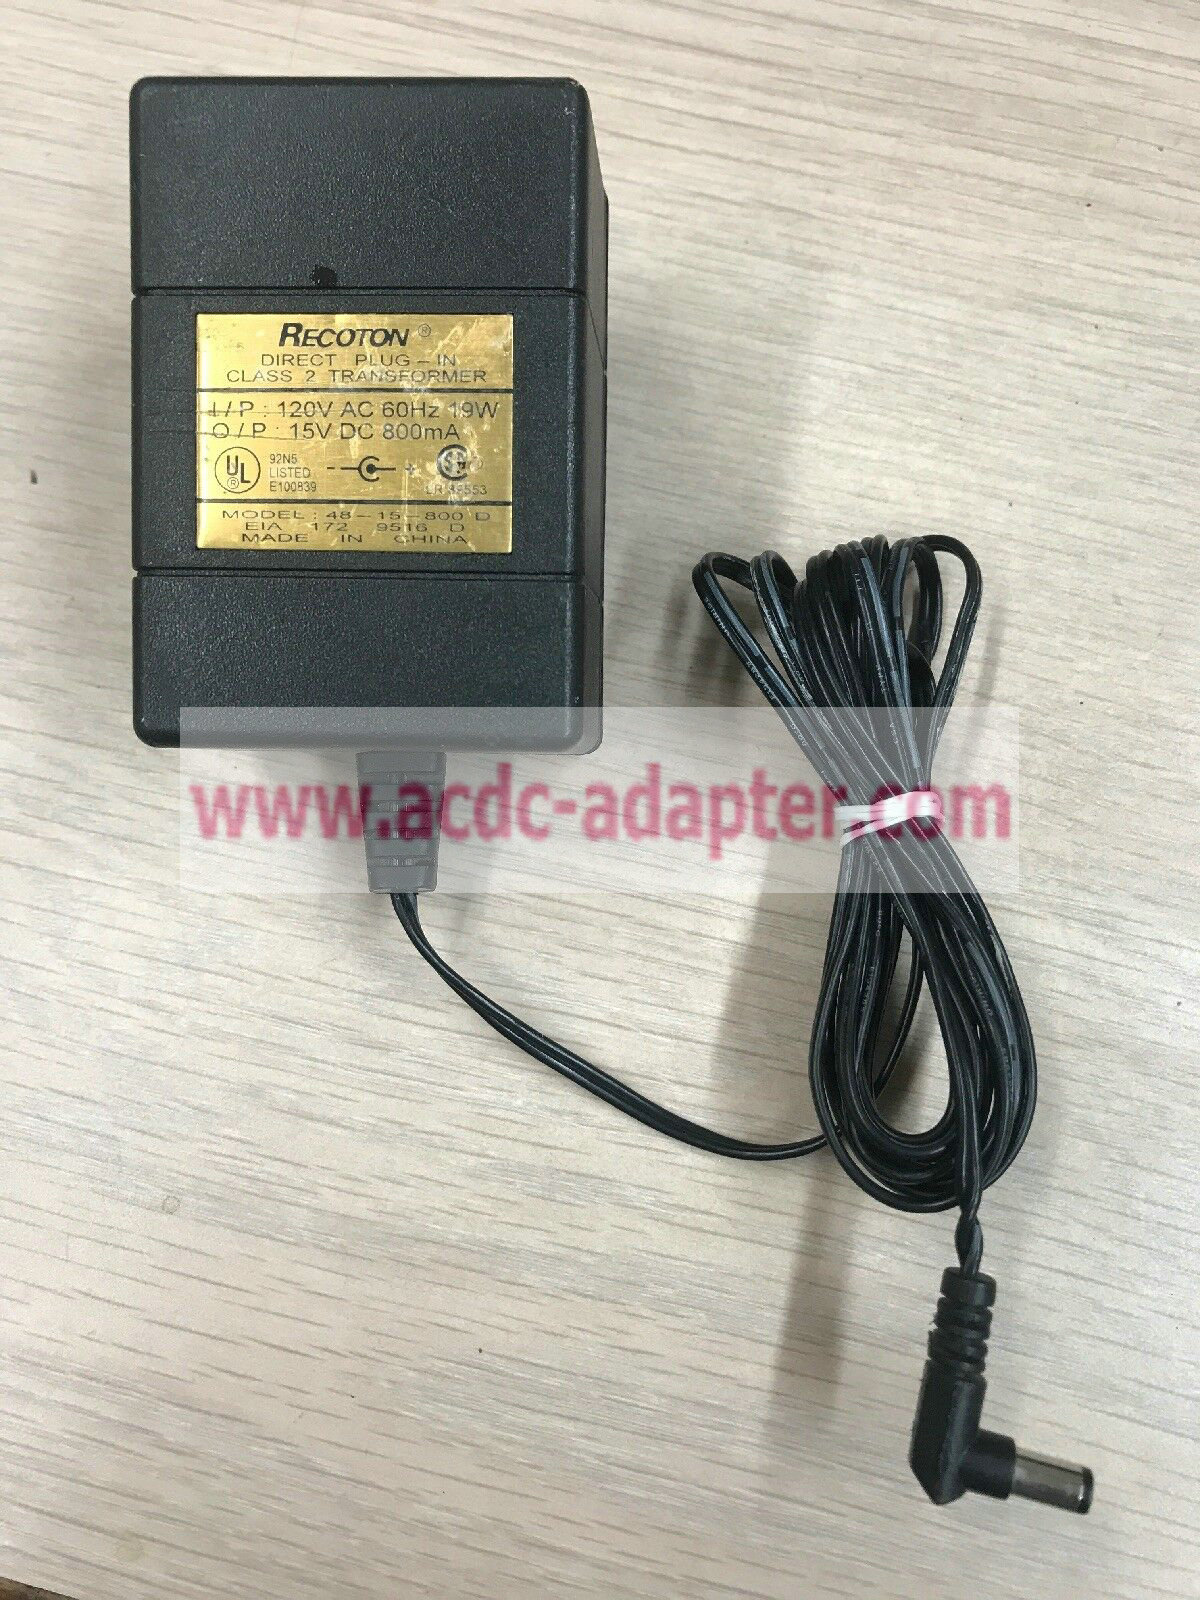 New 15V DC 800mA Recoton 48-15-800D Adapter Power Supply For Wireless Speakers - Click Image to Close